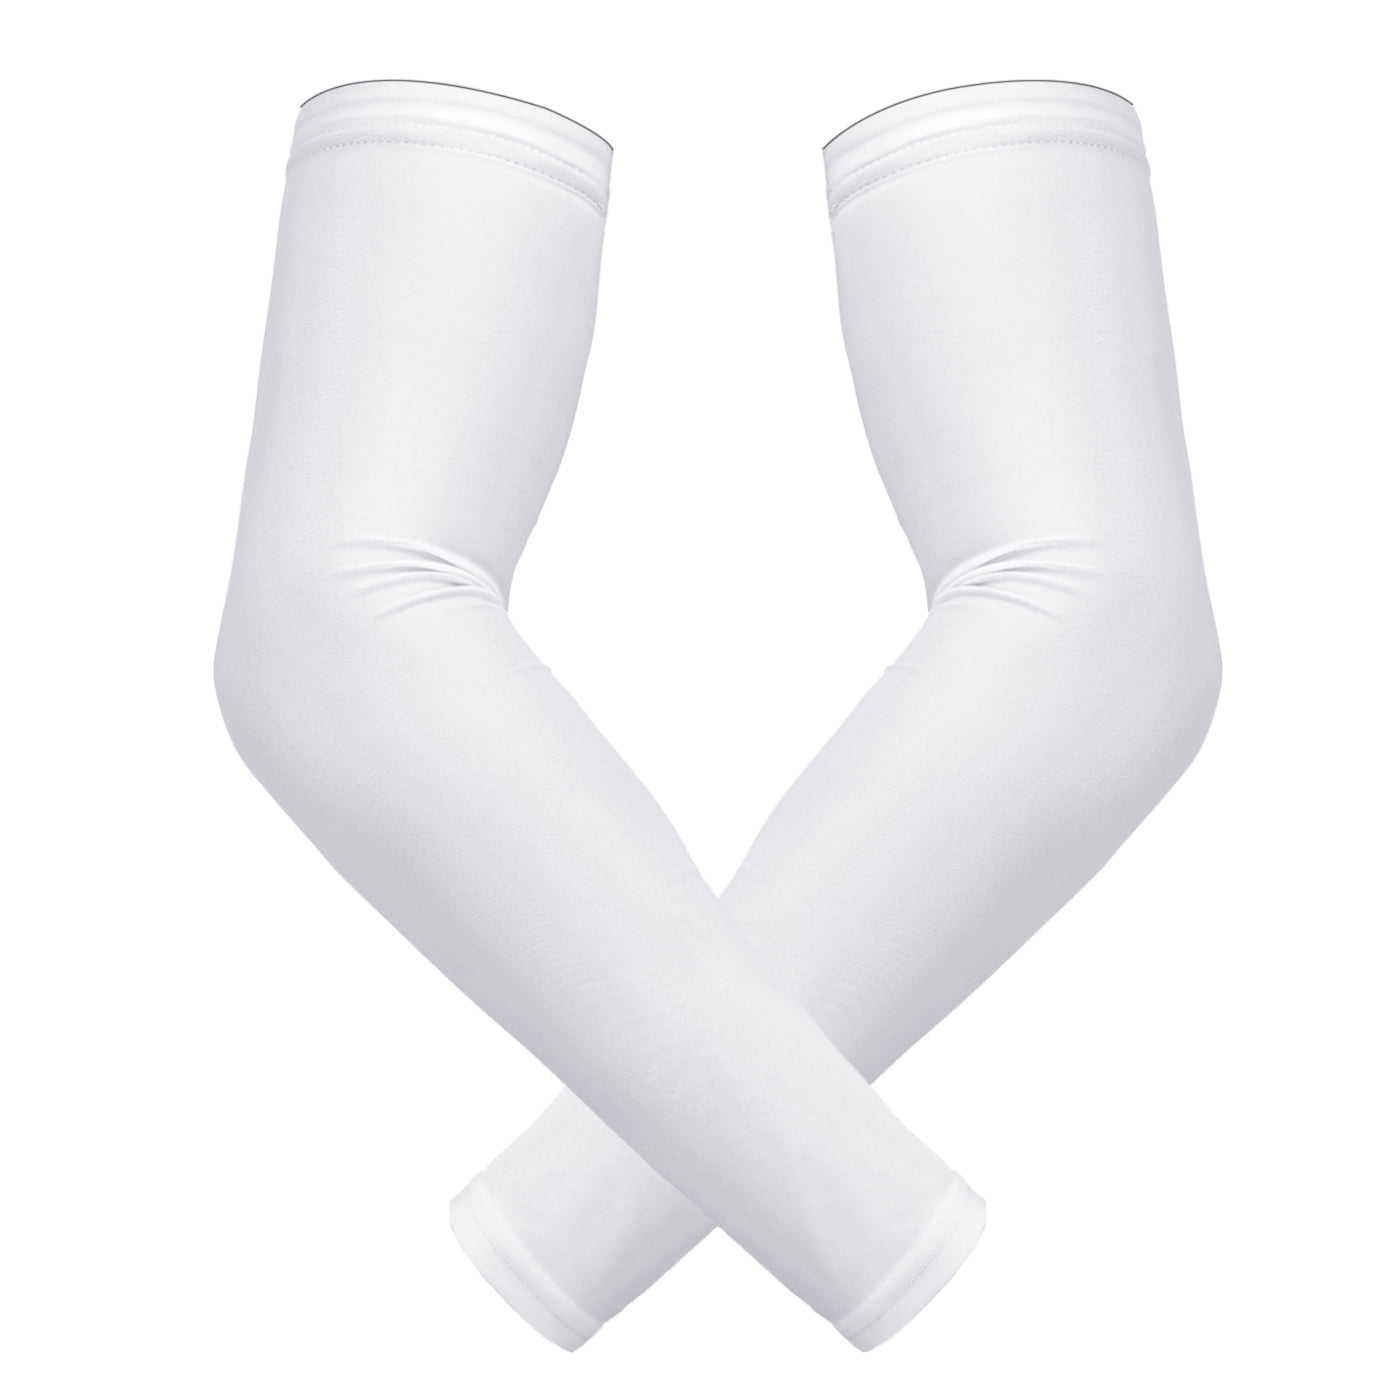 Compression Arm Sleeves for Basketball Football Baseball and Other Activities COOLOMG 30+ Colors,Youth /& Adult 1 Pair